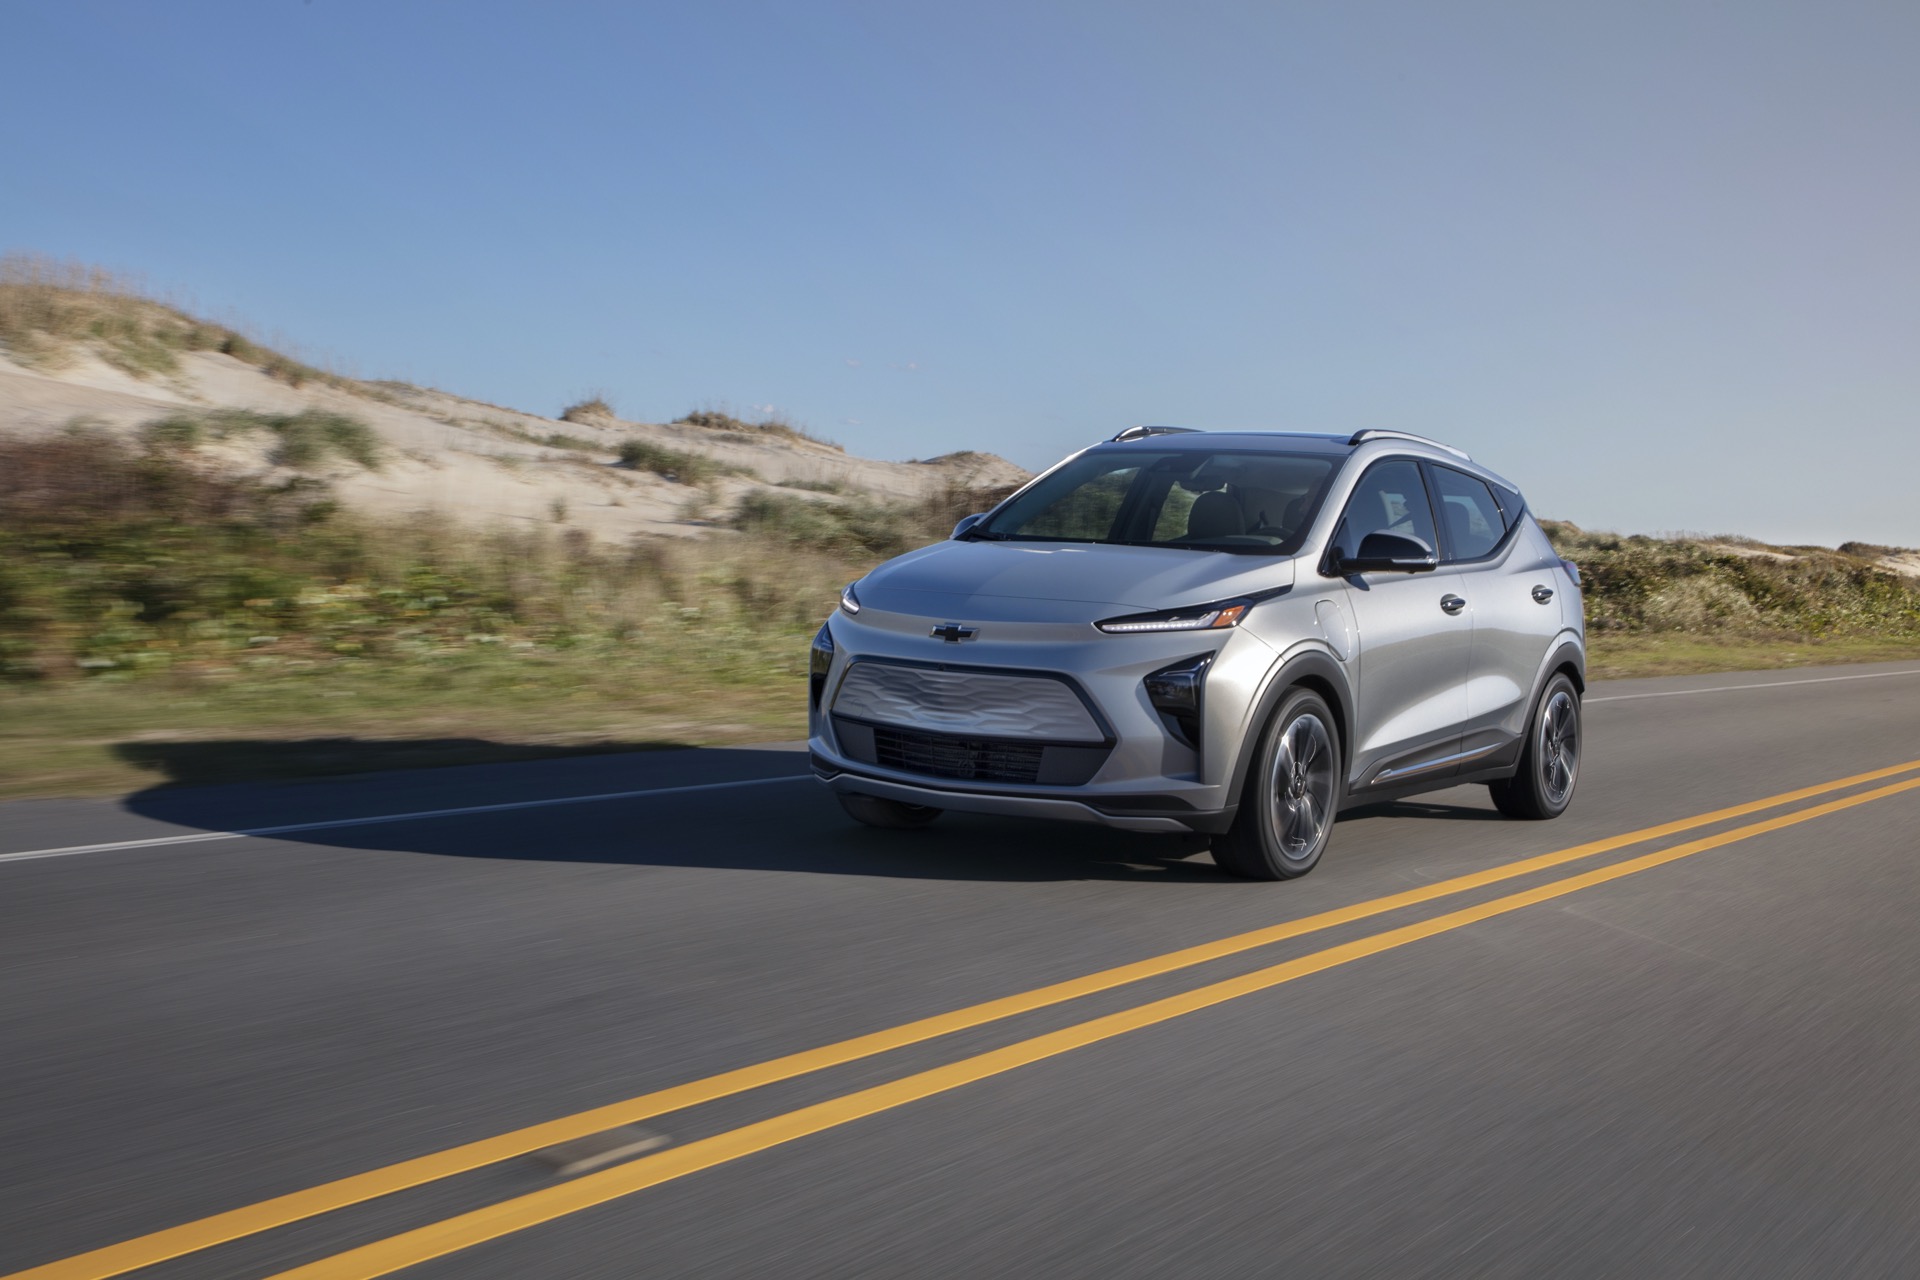 GM EVs at Hertz, Sorento Hybrid price hike, taxing the wealthy for EV infrastructure: The Week in Reverse